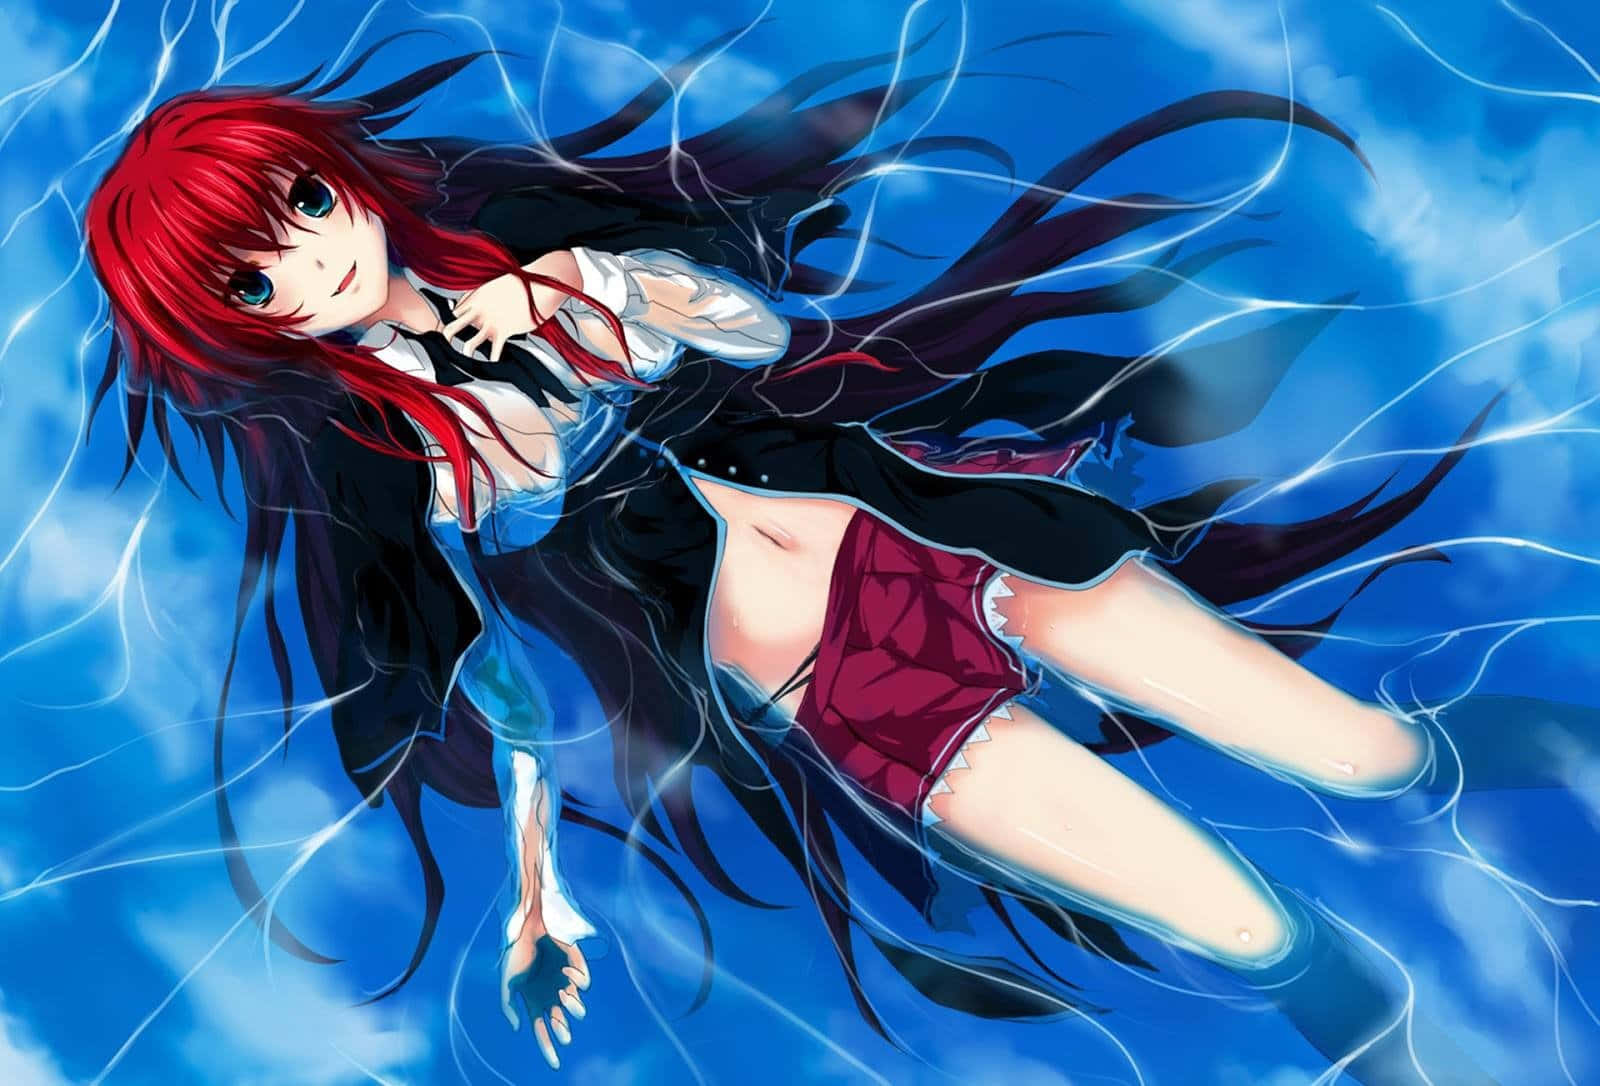 Download The Hilarious Adventures of Highschool Dxd